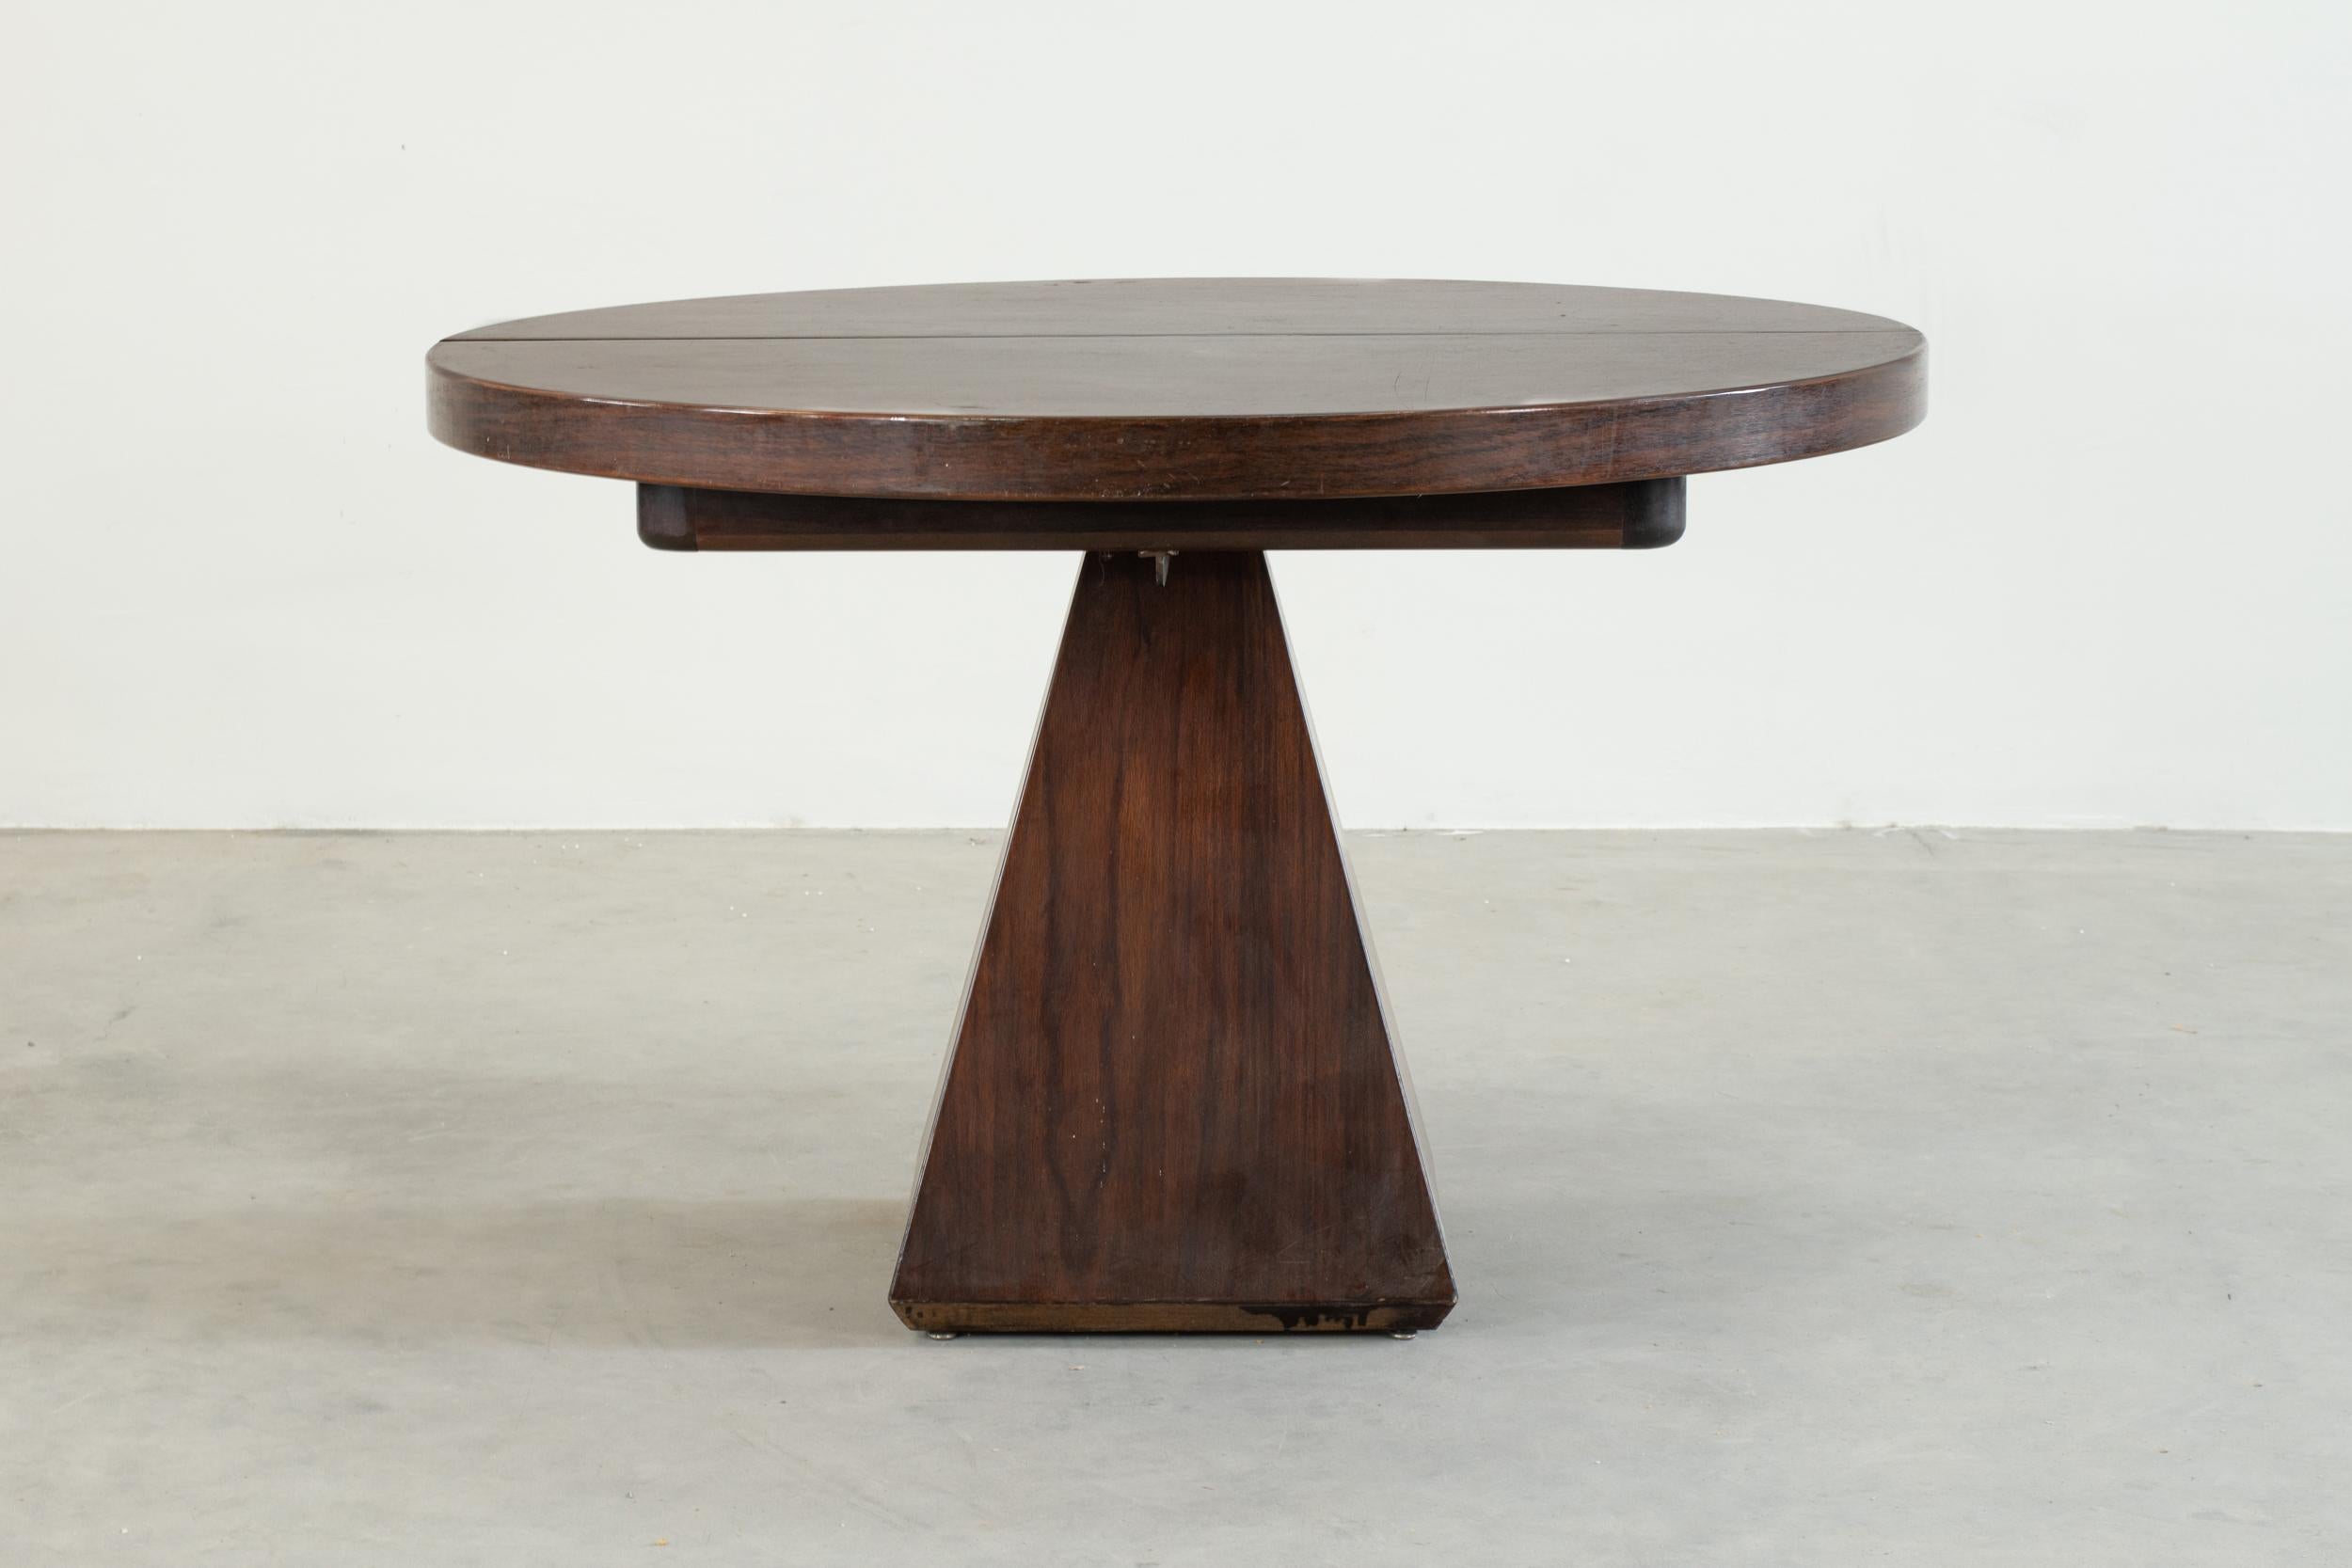 Dining table round (extensible) with a geometric base in rosewood and metal, designed by Vittorio Introini and produced by Saporiti, 1960s, Italy.

Dimension: Ø120 cm - Ø166 cm (max extension).
  